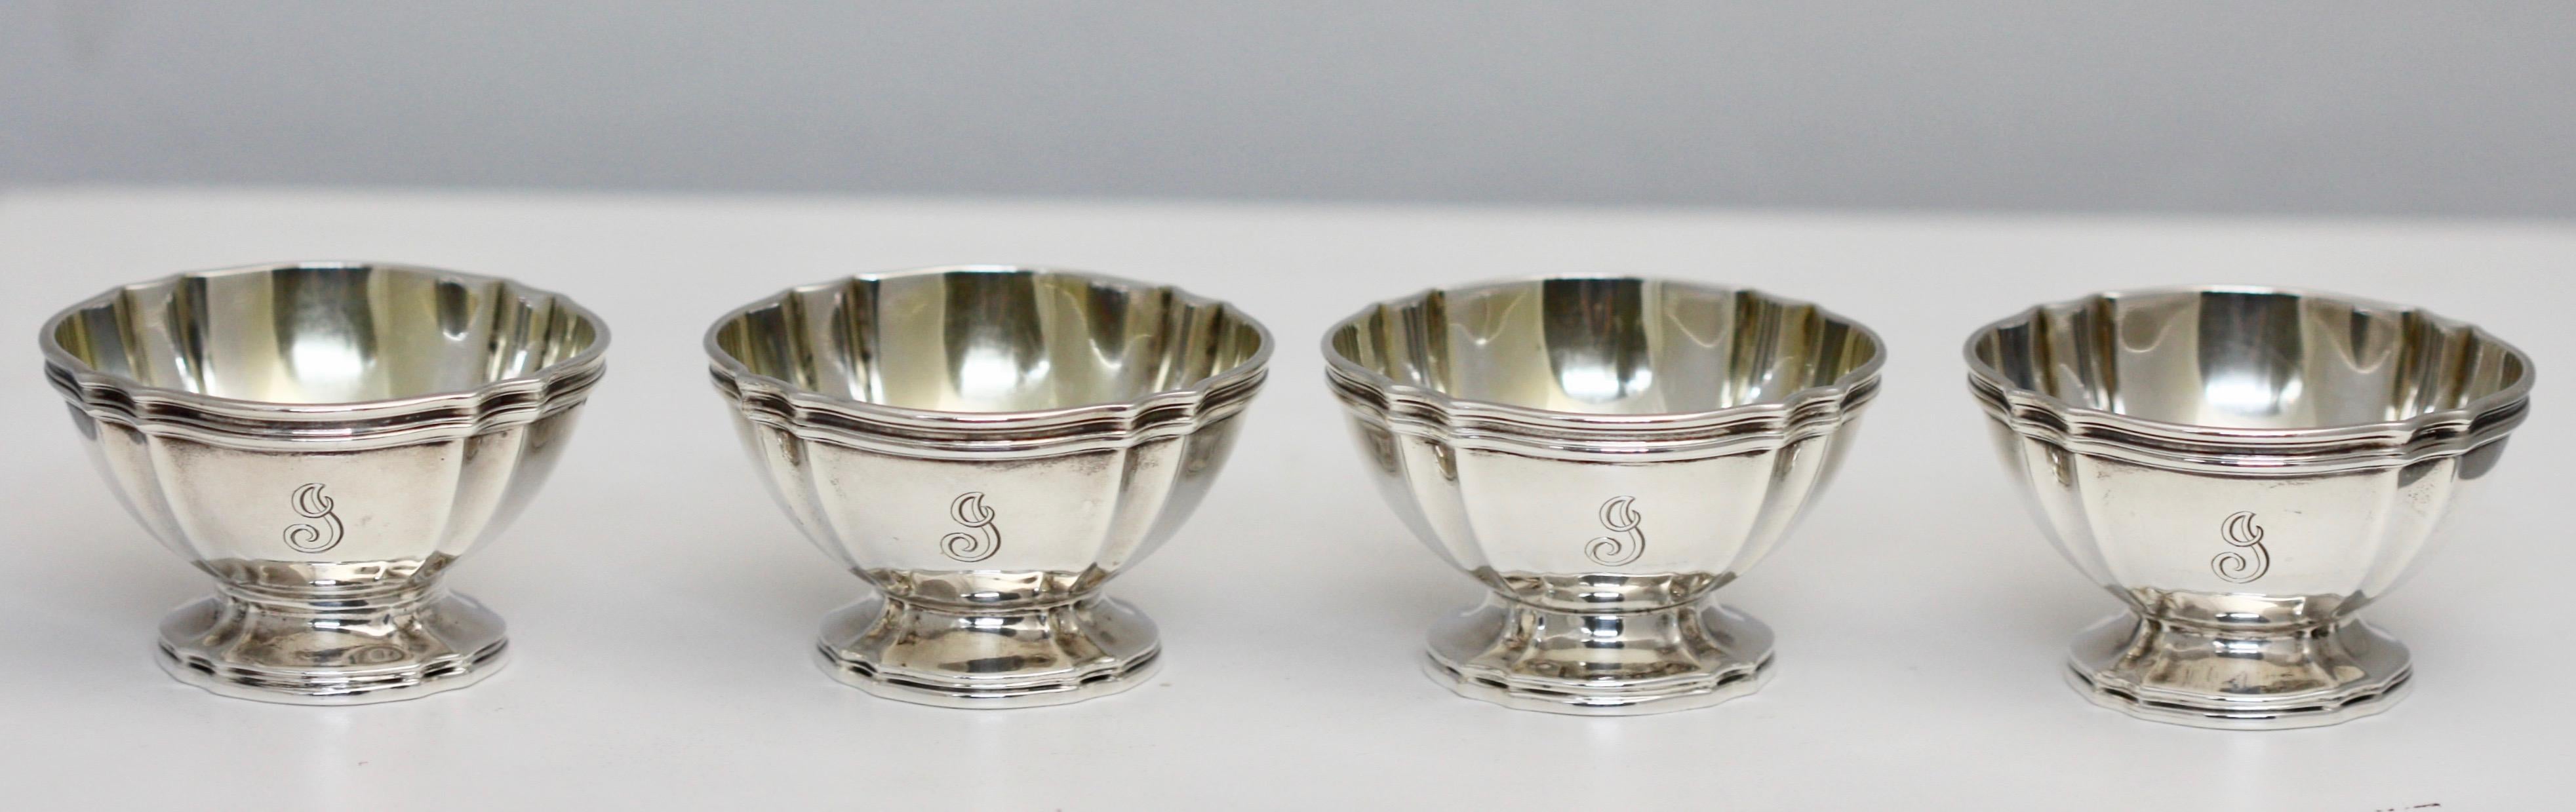 Set of Eight, Tiffany & Co., Sterling Silver Open Salts & Pepper Shakers For Sale 3